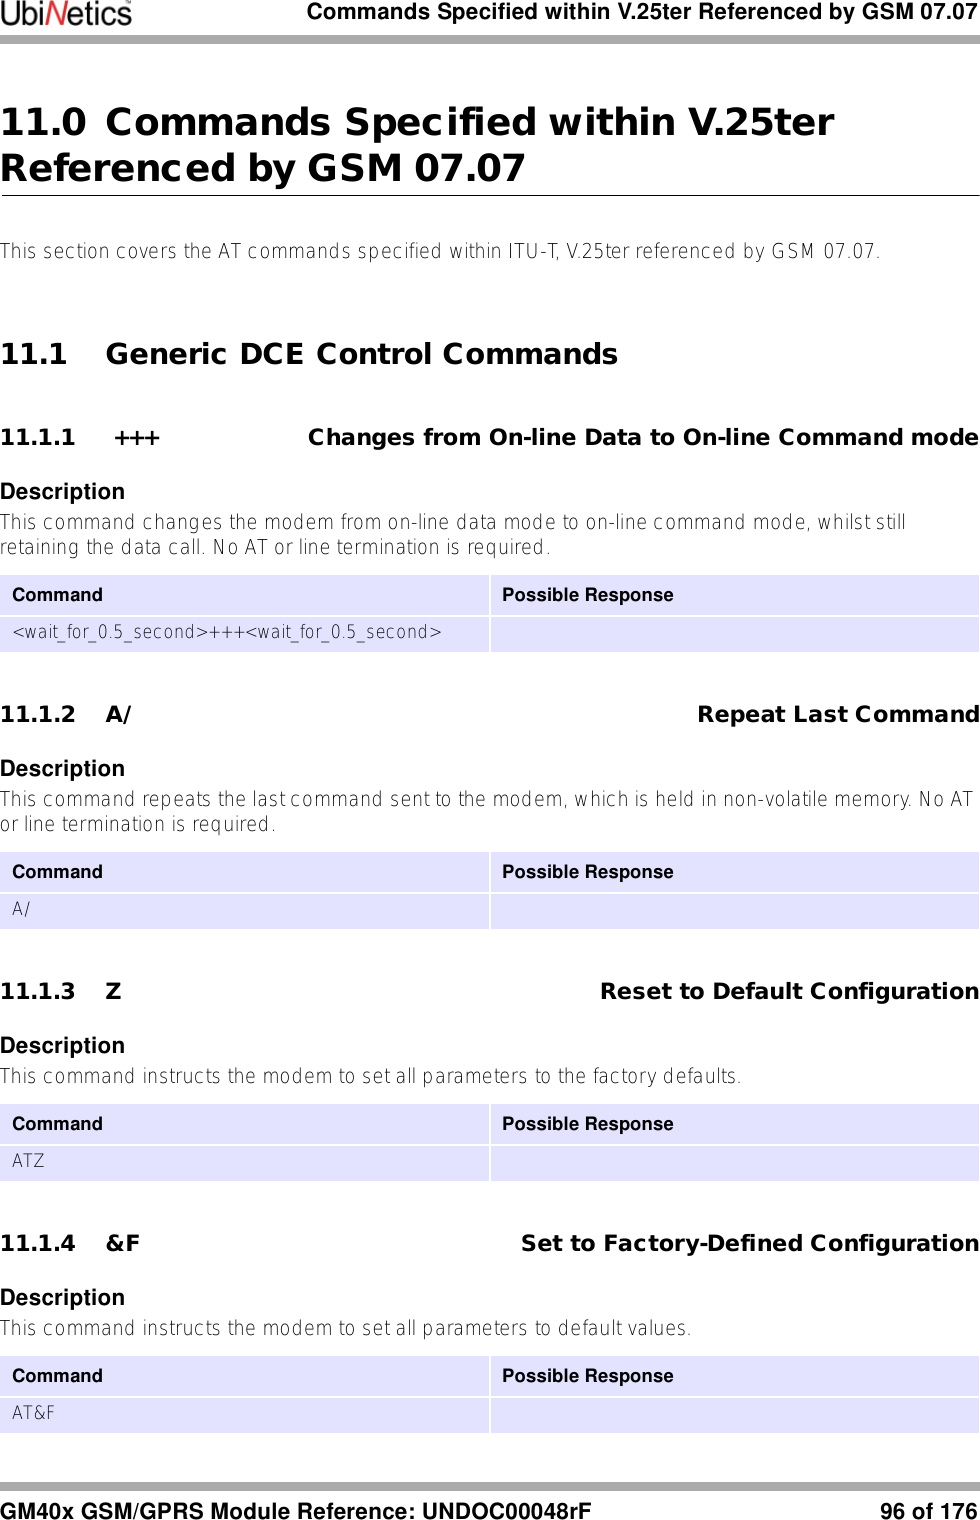 Commands Specified within V.25ter Referenced by GSM 07.07GM40x GSM/GPRS Module Reference: UNDOC00048rF 96 of 17611.0 Commands Specified within V.25ter Referenced by GSM 07.07This section covers the AT commands specified within ITU-T, V.25ter referenced by GSM 07.07.11.1 Generic DCE Control Commands11.1.1  +++ Changes from On-line Data to On-line Command modeDescriptionThis command changes the modem from on-line data mode to on-line command mode, whilst still retaining the data call. No AT or line termination is required.11.1.2 A/ Repeat Last CommandDescriptionThis command repeats the last command sent to the modem, which is held in non-volatile memory. No AT or line termination is required.11.1.3 Z Reset to Default ConfigurationDescriptionThis command instructs the modem to set all parameters to the factory defaults.11.1.4 &amp;F Set to Factory-Defined ConfigurationDescriptionThis command instructs the modem to set all parameters to default values.Command Possible Response&lt;wait_for_0.5_second&gt;+++&lt;wait_for_0.5_second&gt;Command Possible ResponseA/Command Possible ResponseATZCommand Possible ResponseAT&amp;F